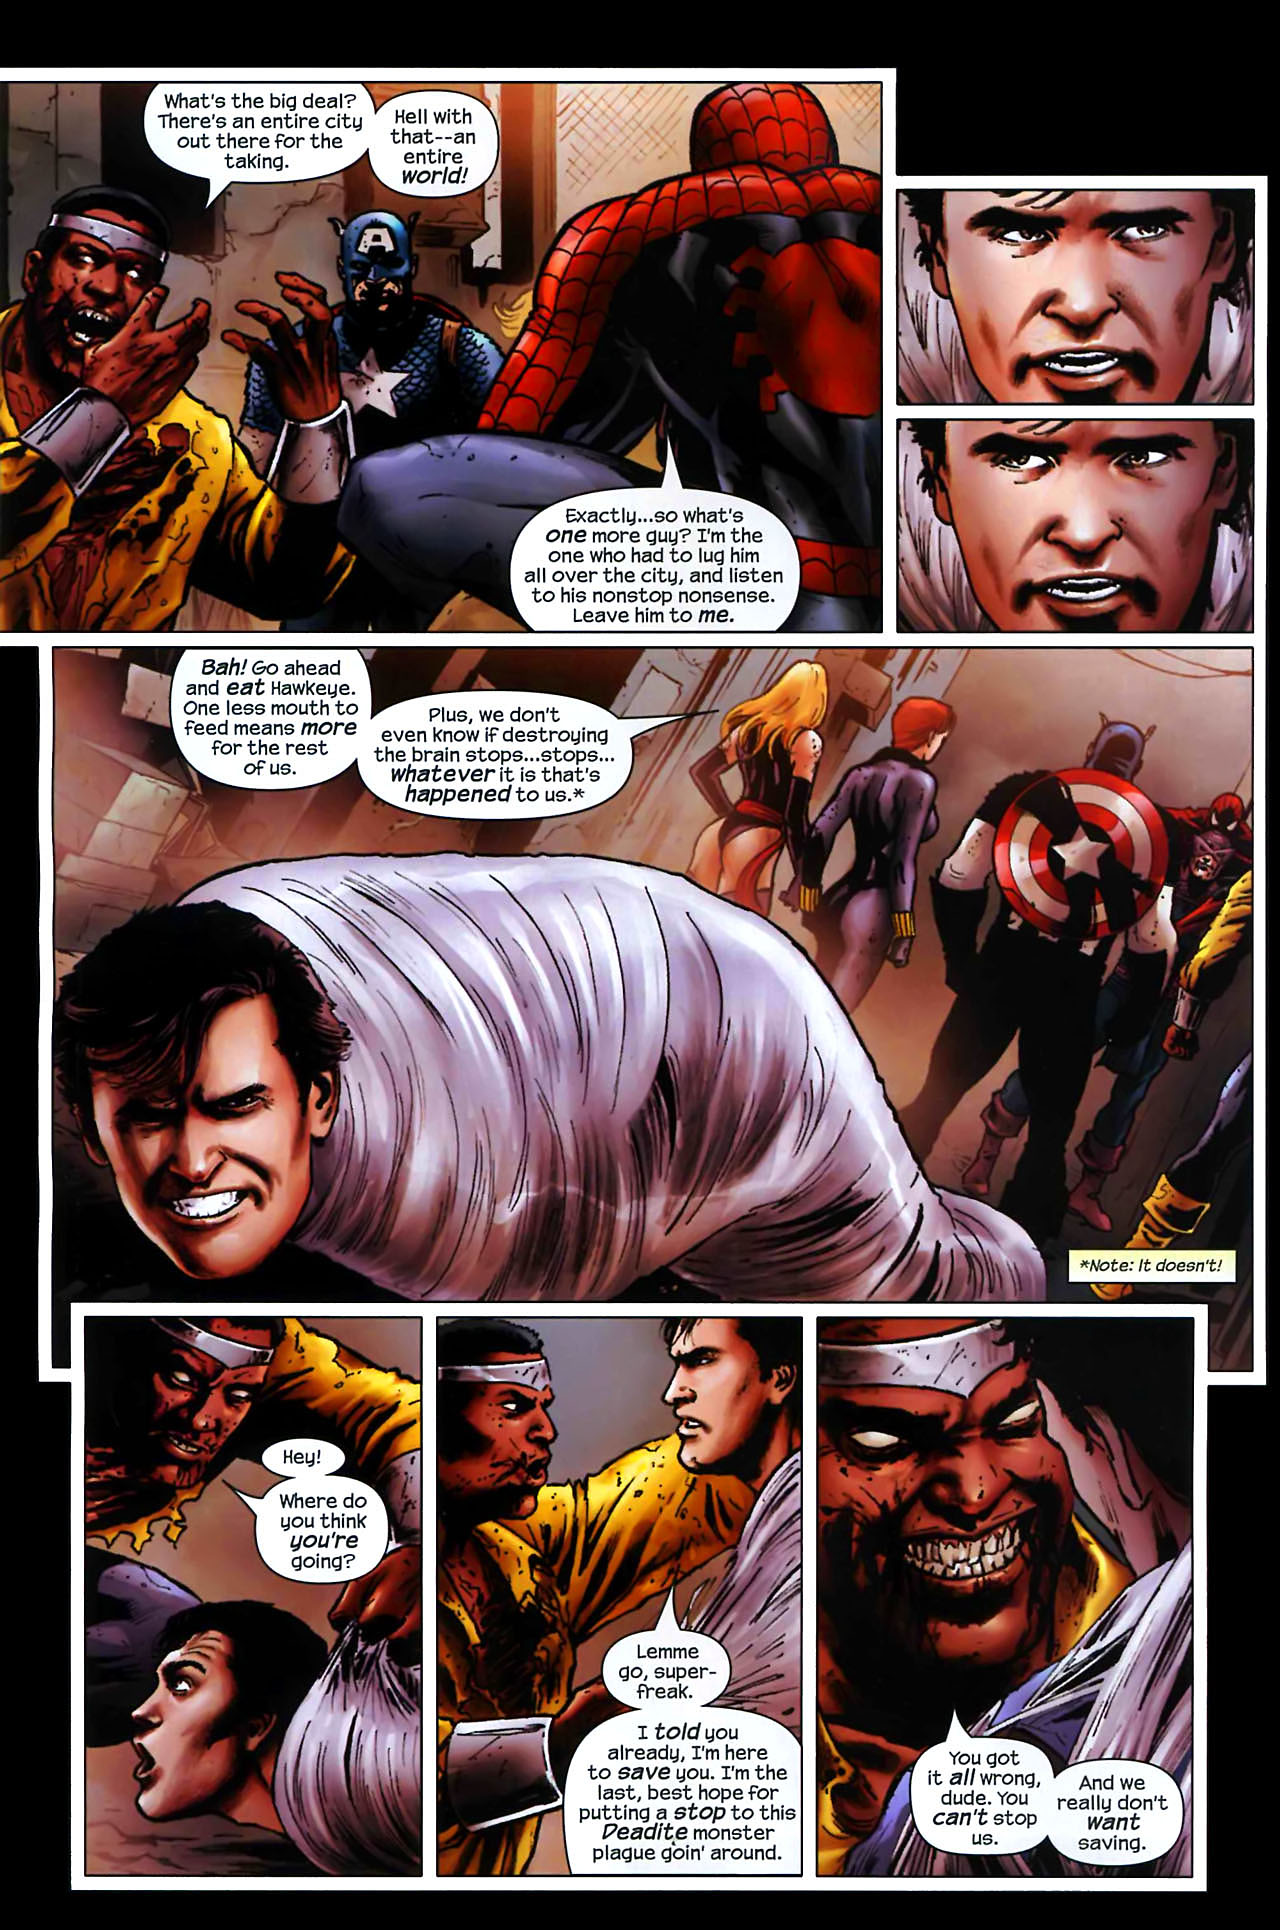 Marvel Zombies vs Army of Darkness 2 of 5